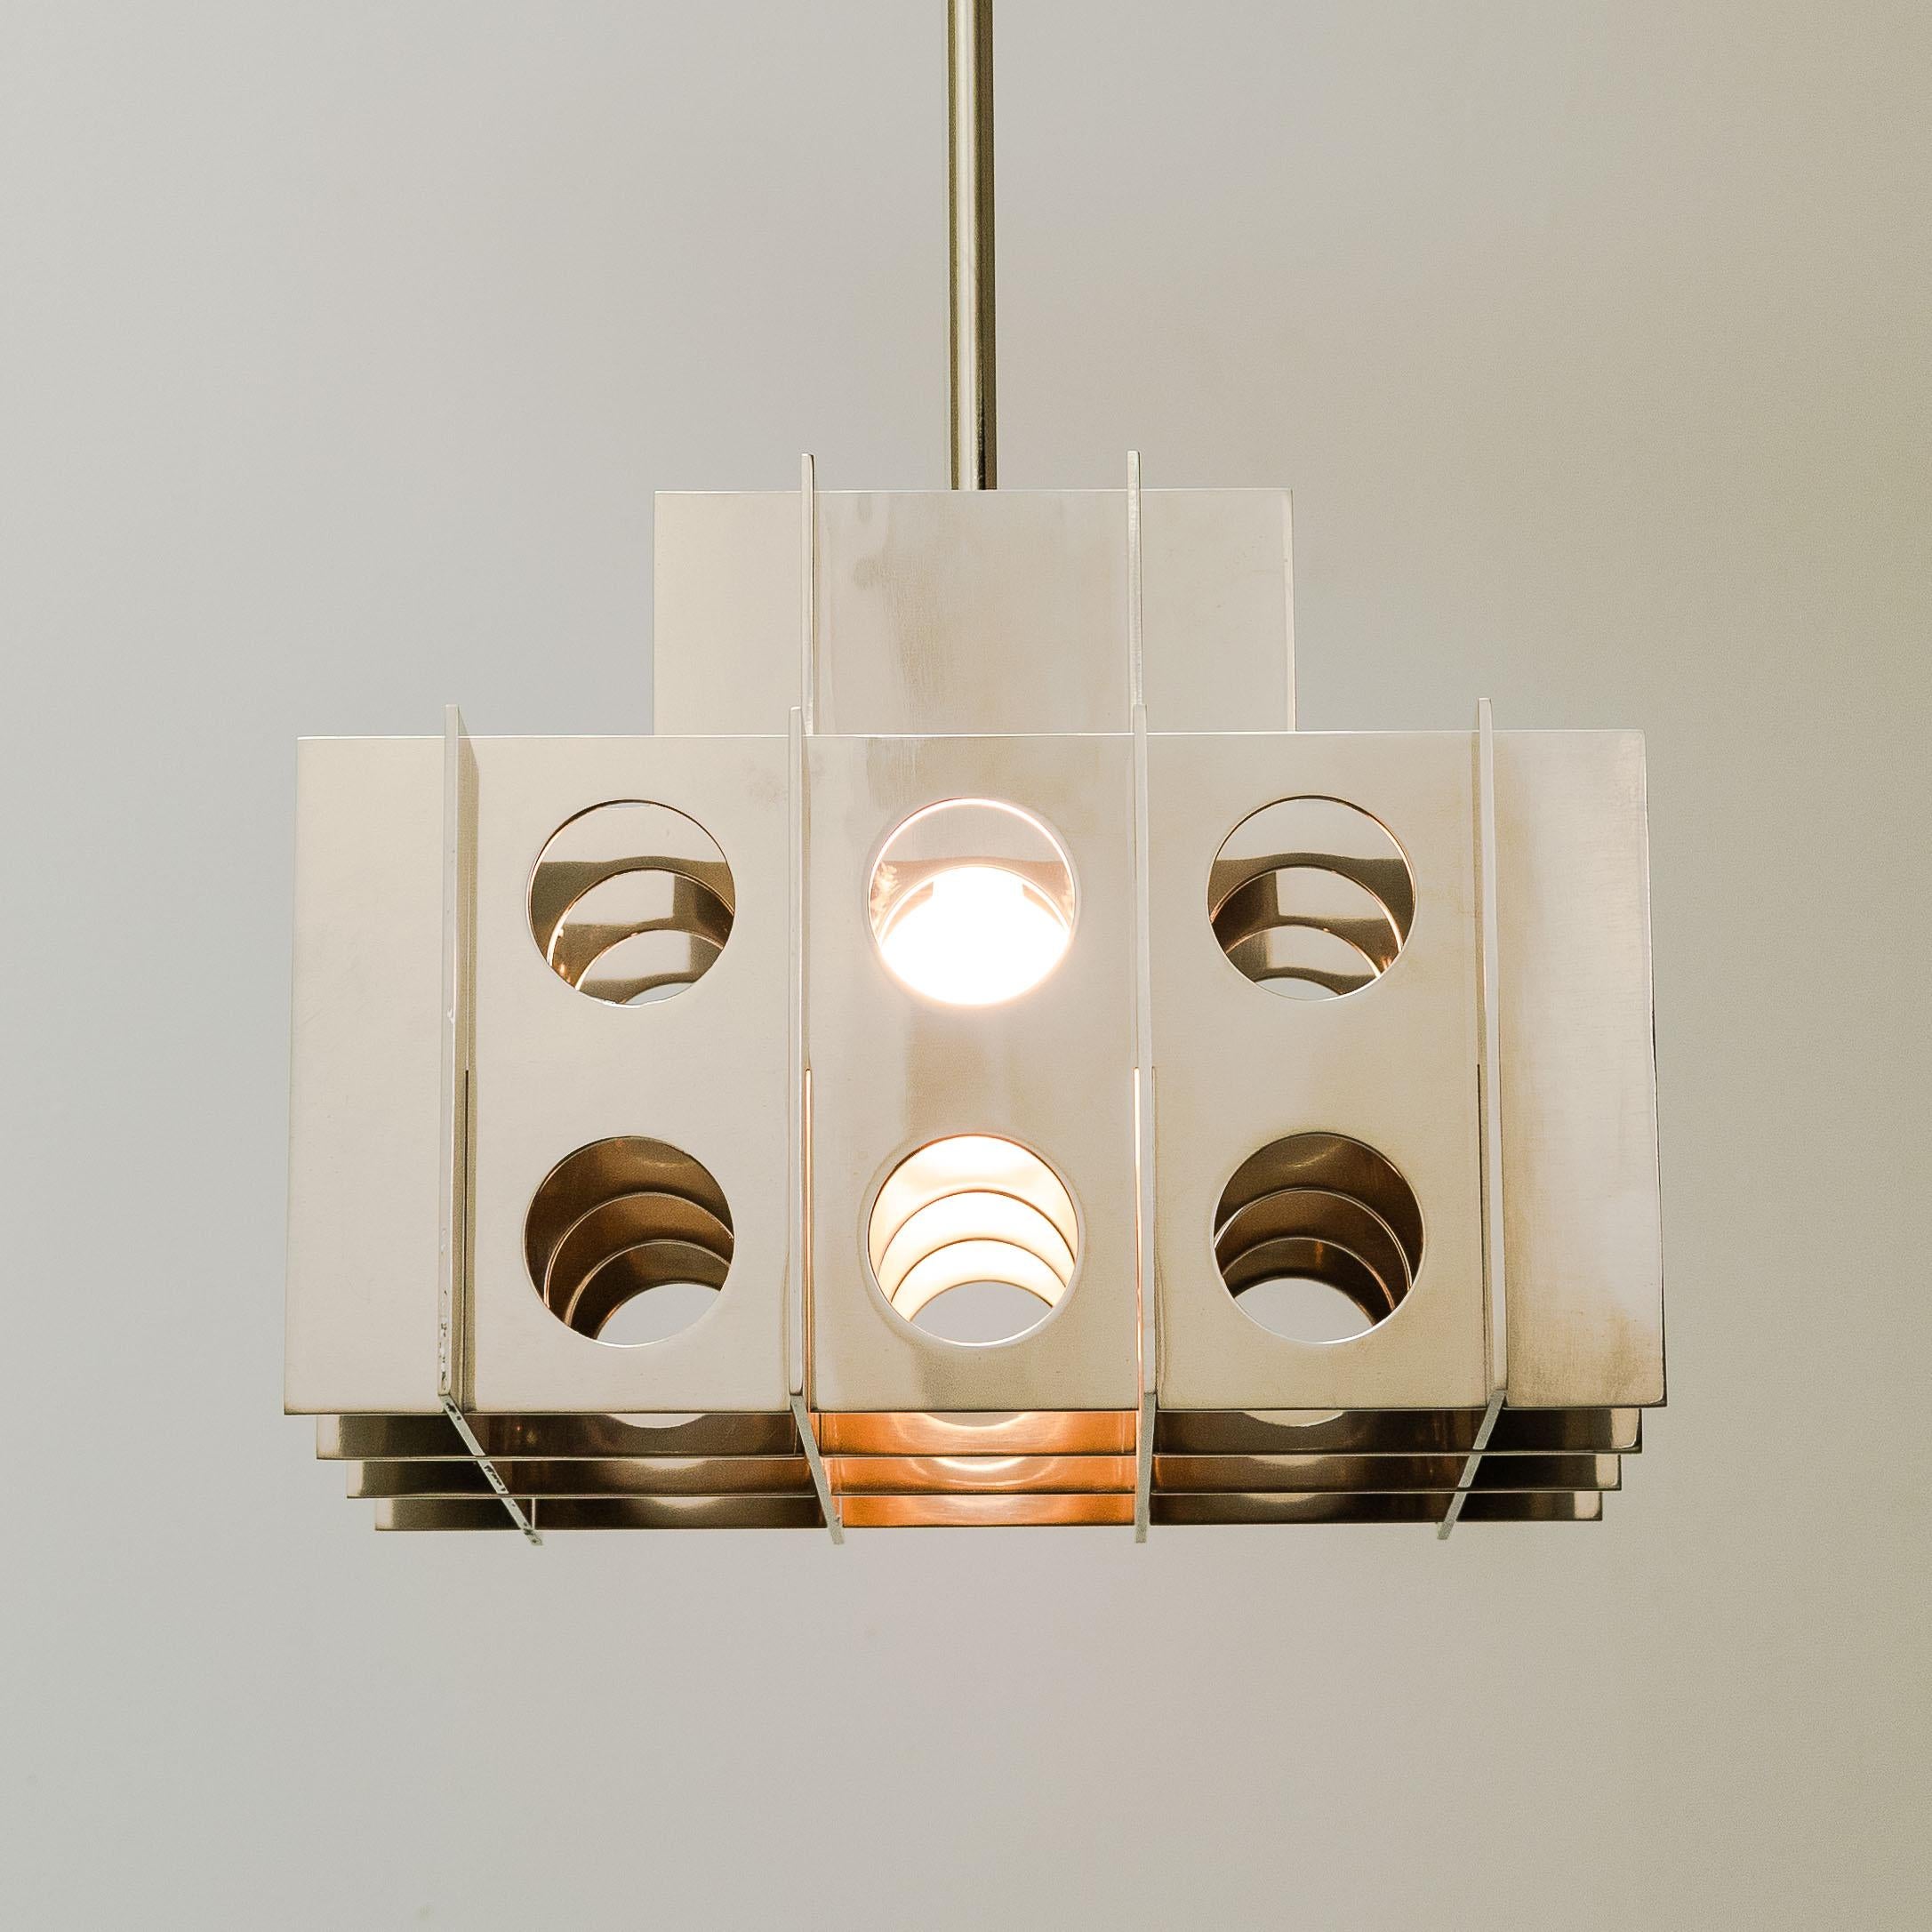 Tenfold Chandelier Light 3TA 32inch, Polished Nickel, Brutalist Pendant Light In New Condition For Sale In Brooklyn, NY